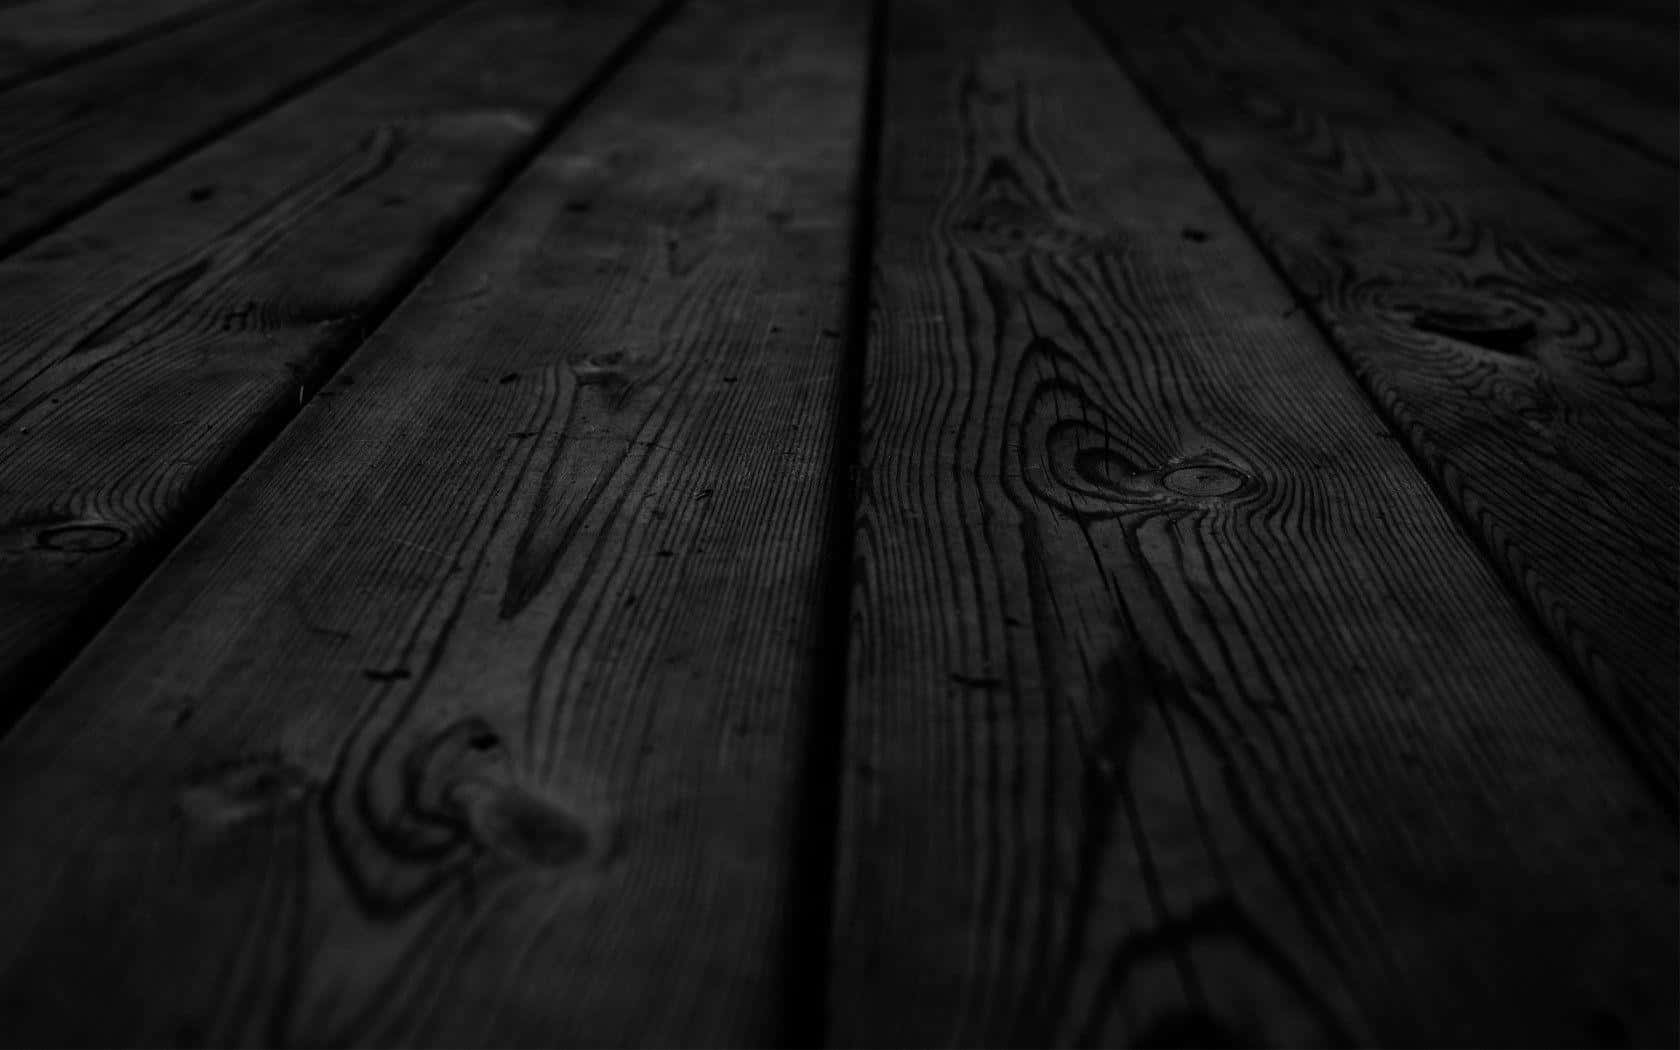 A Black And White Photo Of A Wooden Floor